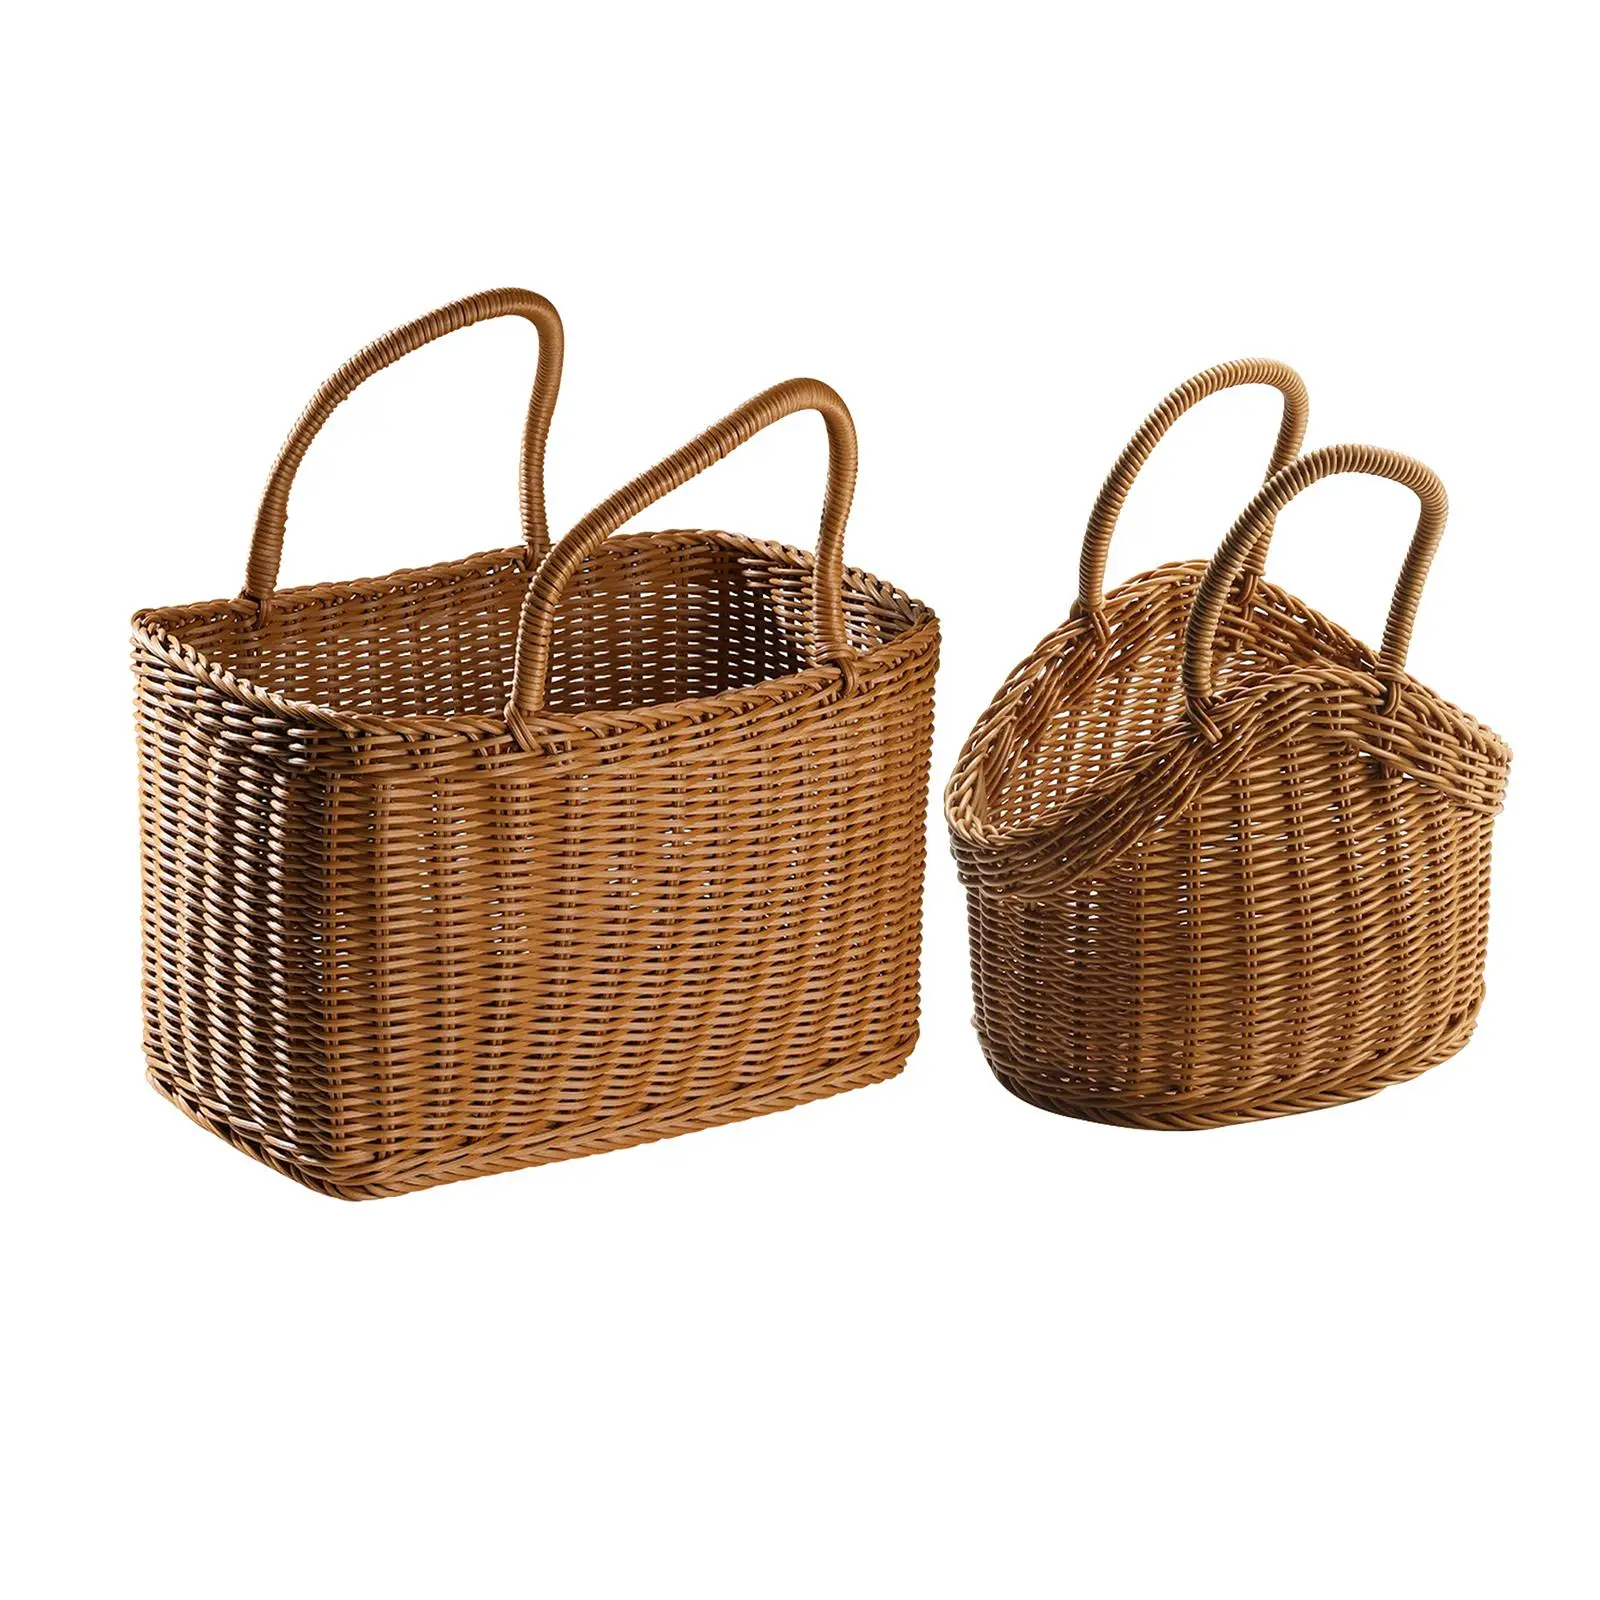 Storage Basket with Handle Ornament Containers for Vegetables Picnic Pantry